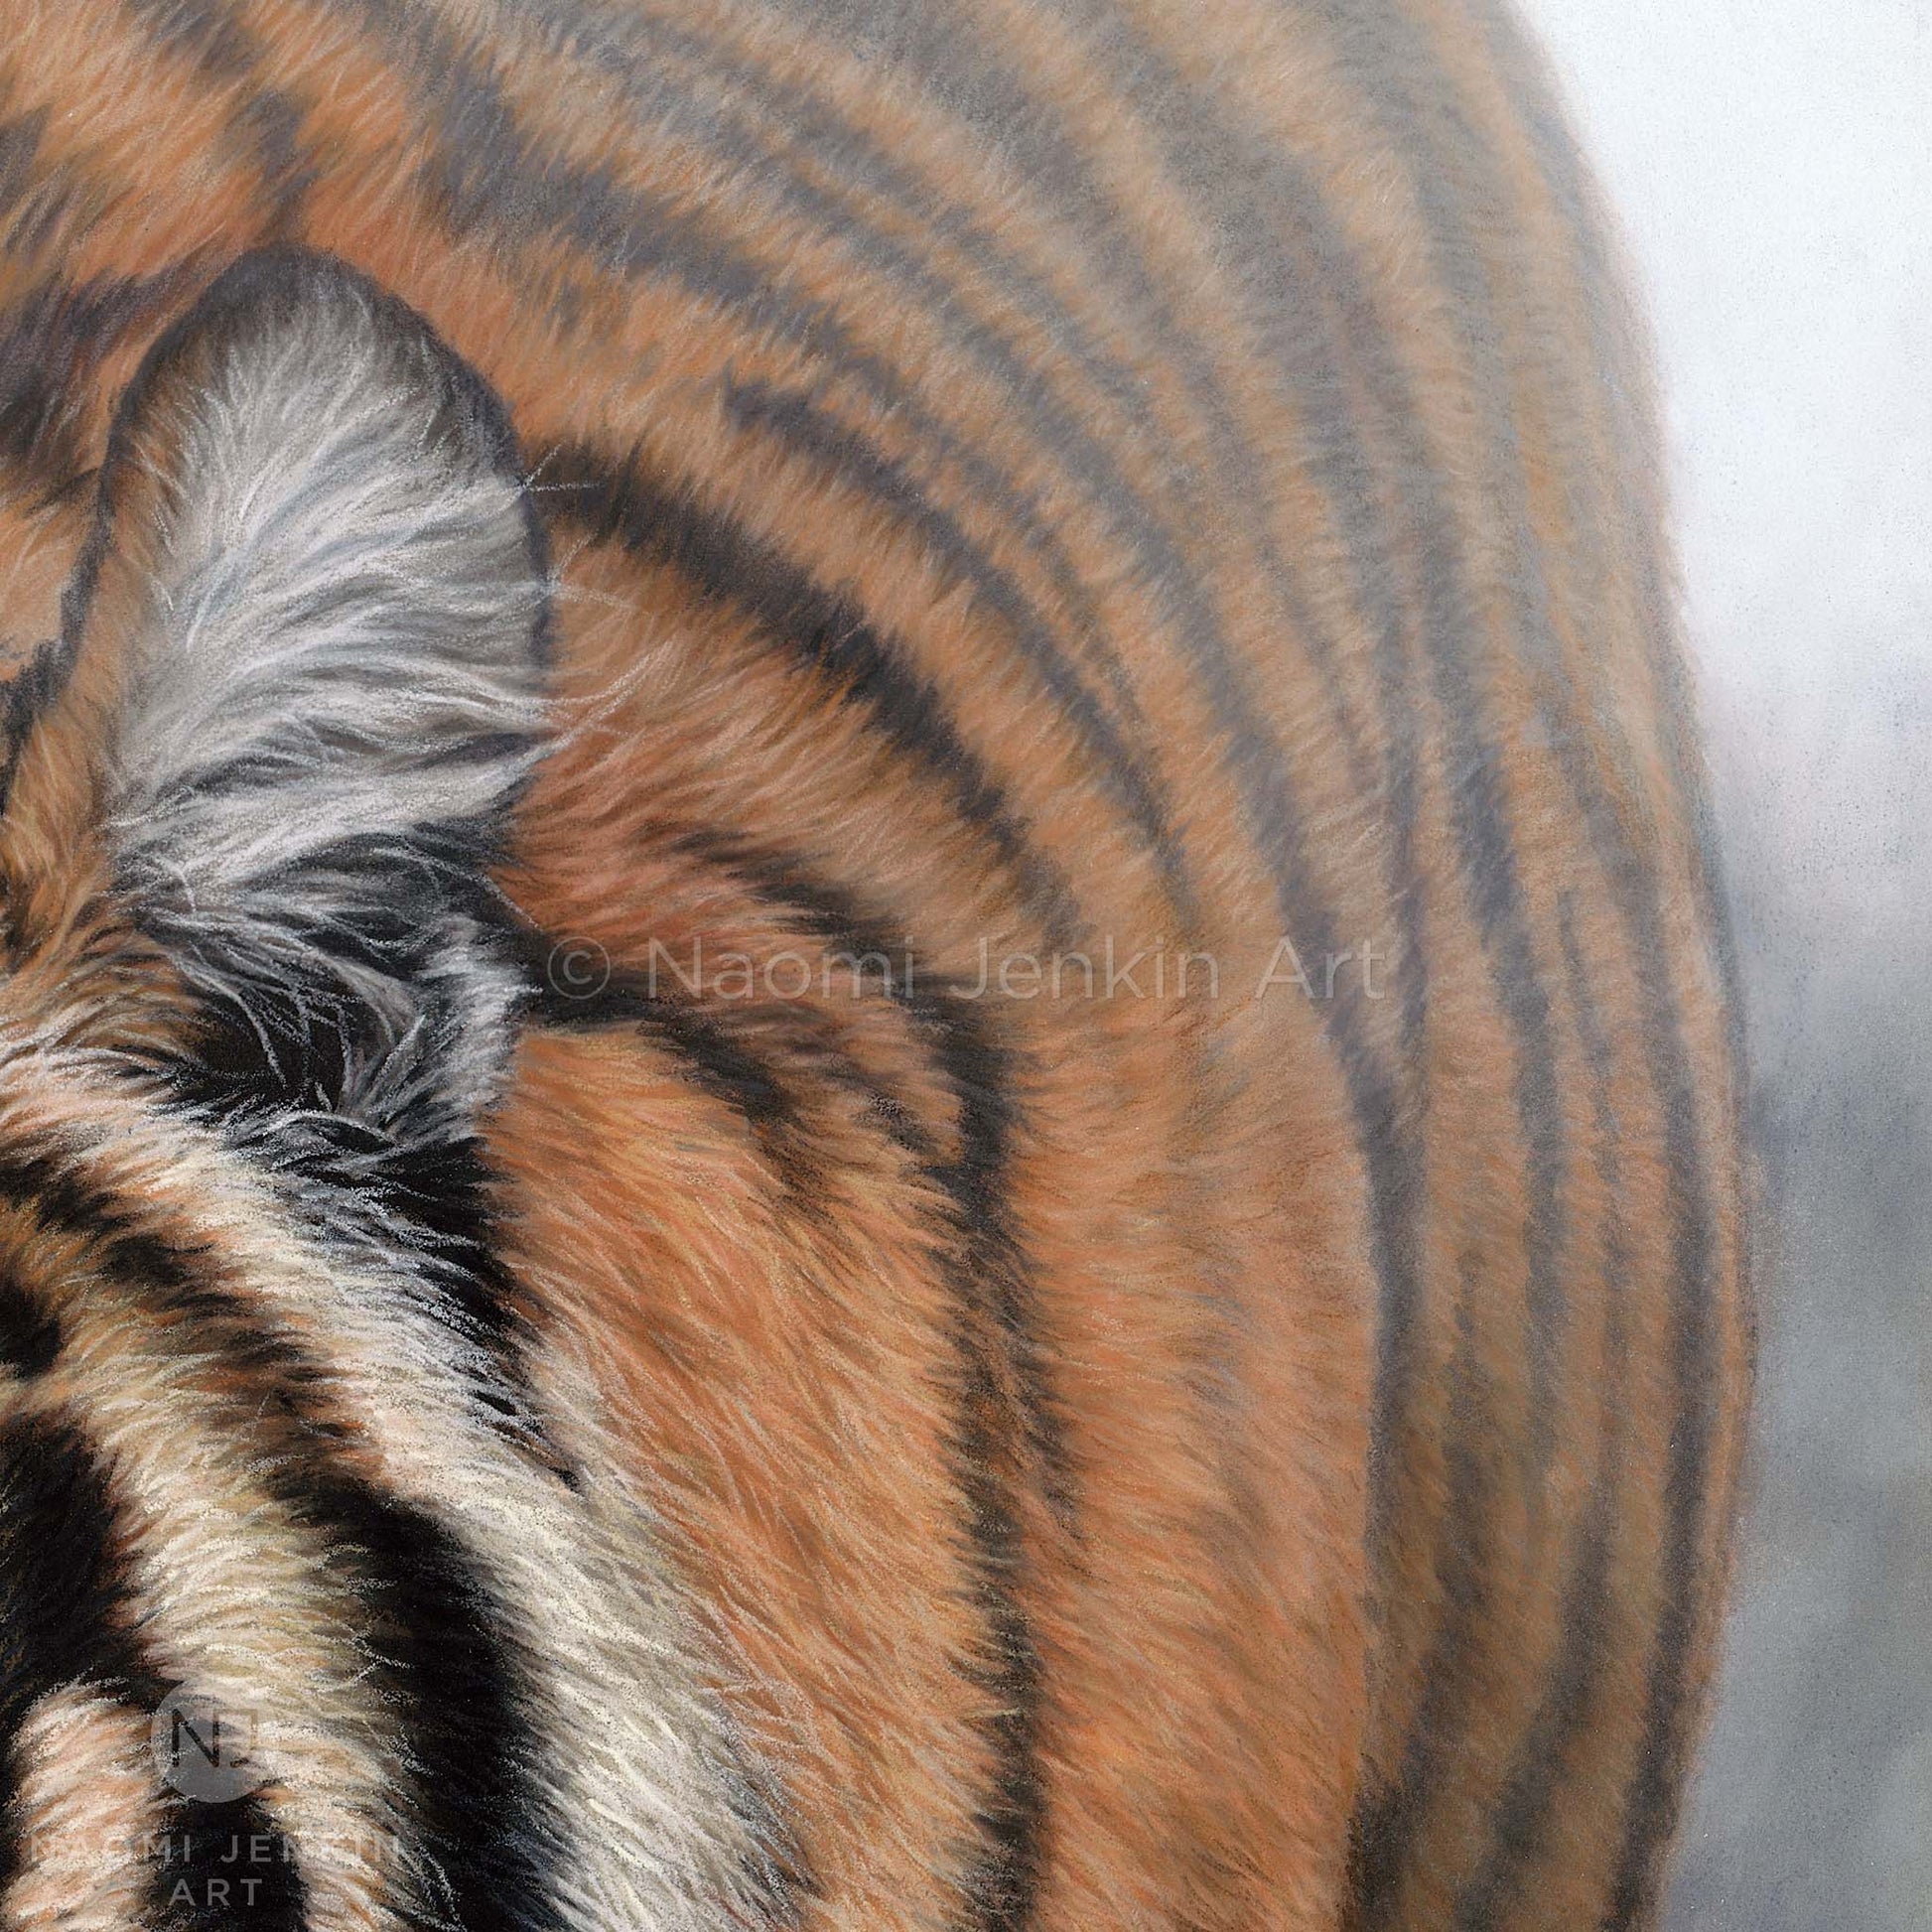 Close up detail from tiger painting "Stealth" by wildlife artist Naomi Jenkin Art